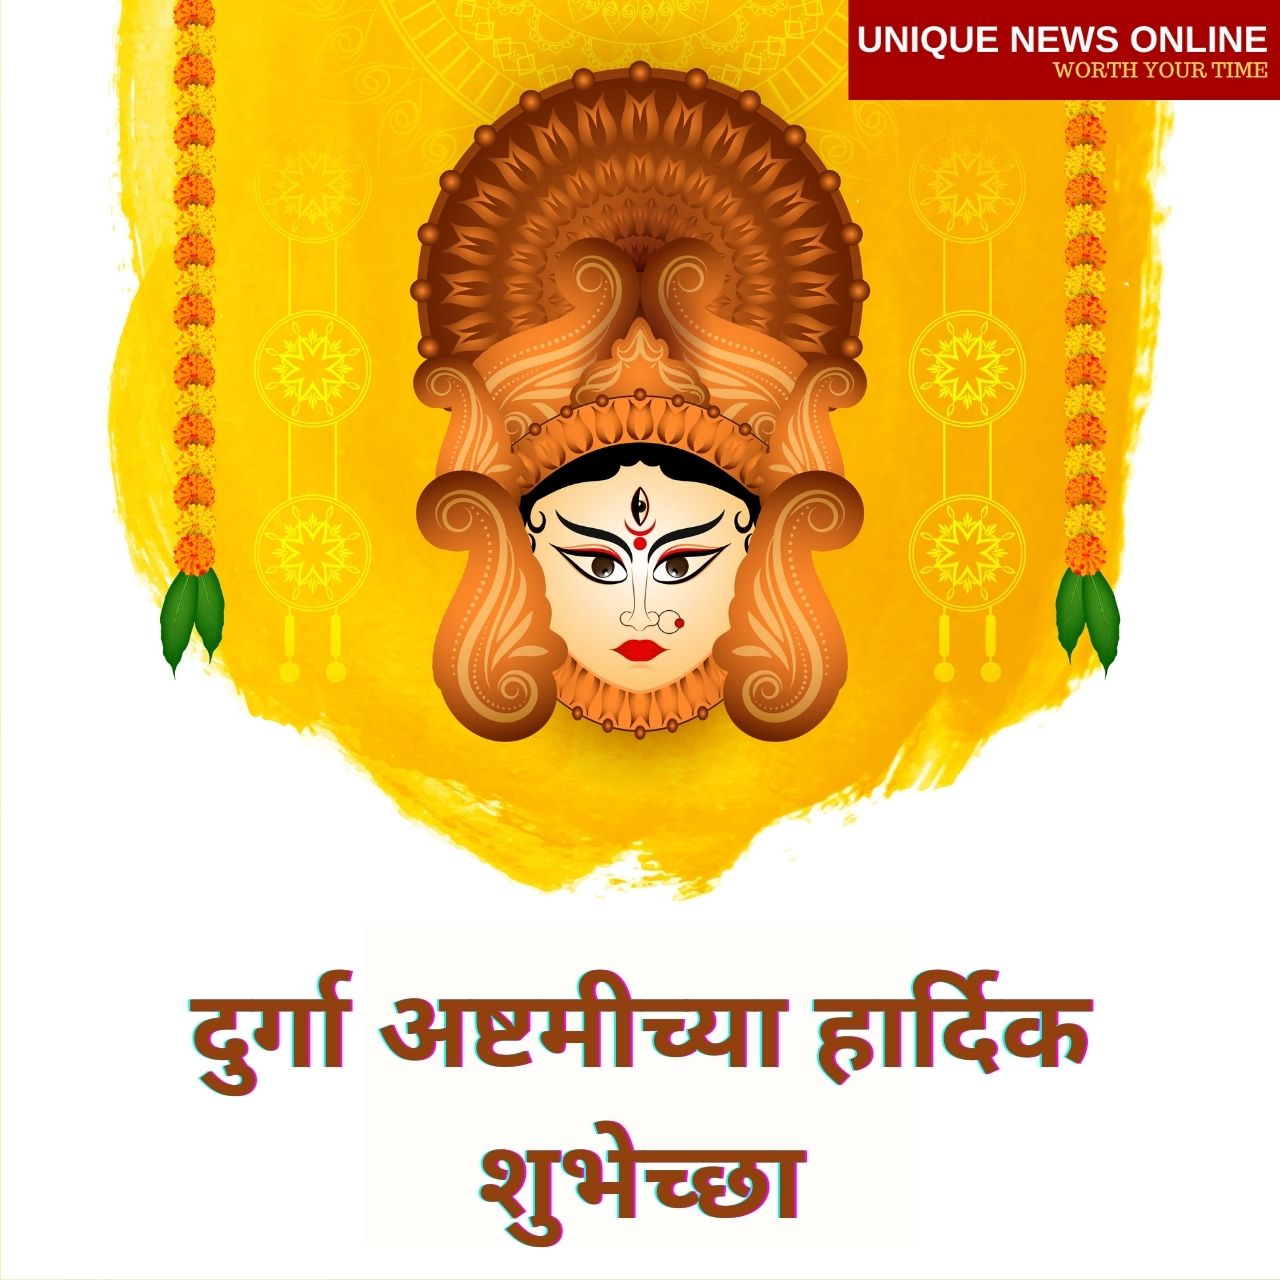 Happy Durga Ashtami 2021 Wishes in Marathi Messages, Greetings, Quotes, and Greetings